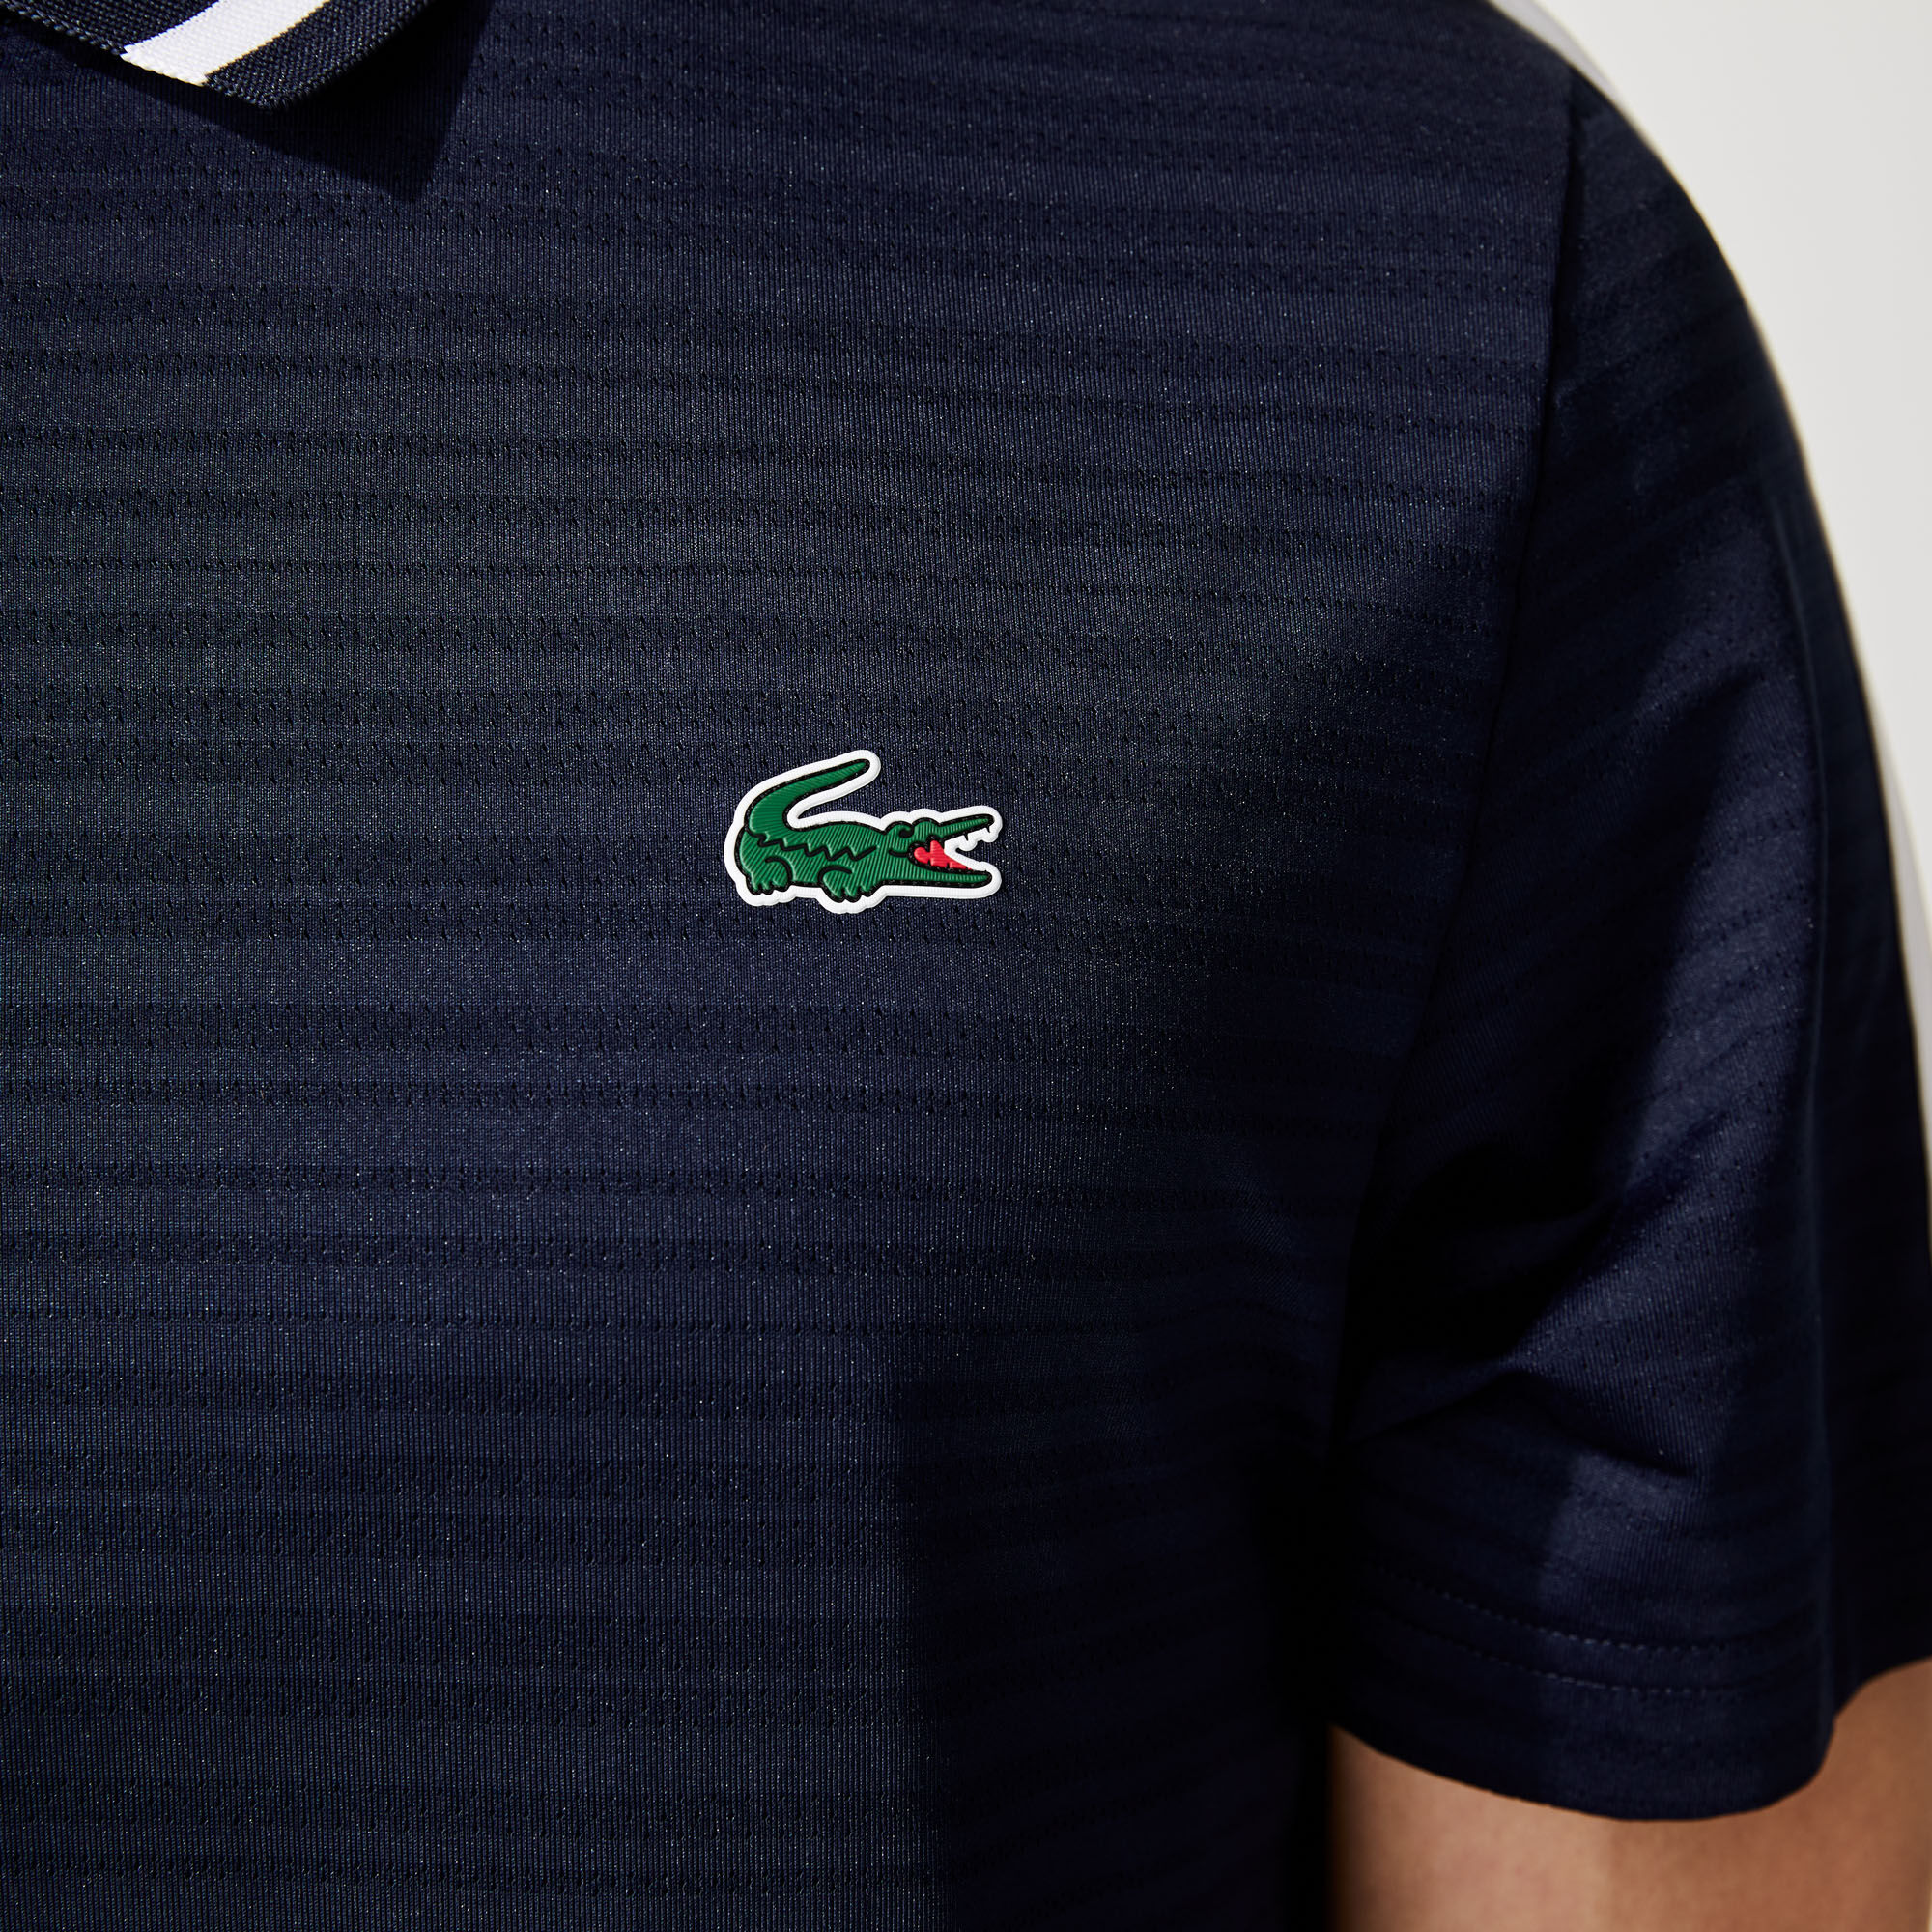 Men’s Lacoste SPORT French Open Edition Second-Skin Polo Shirt